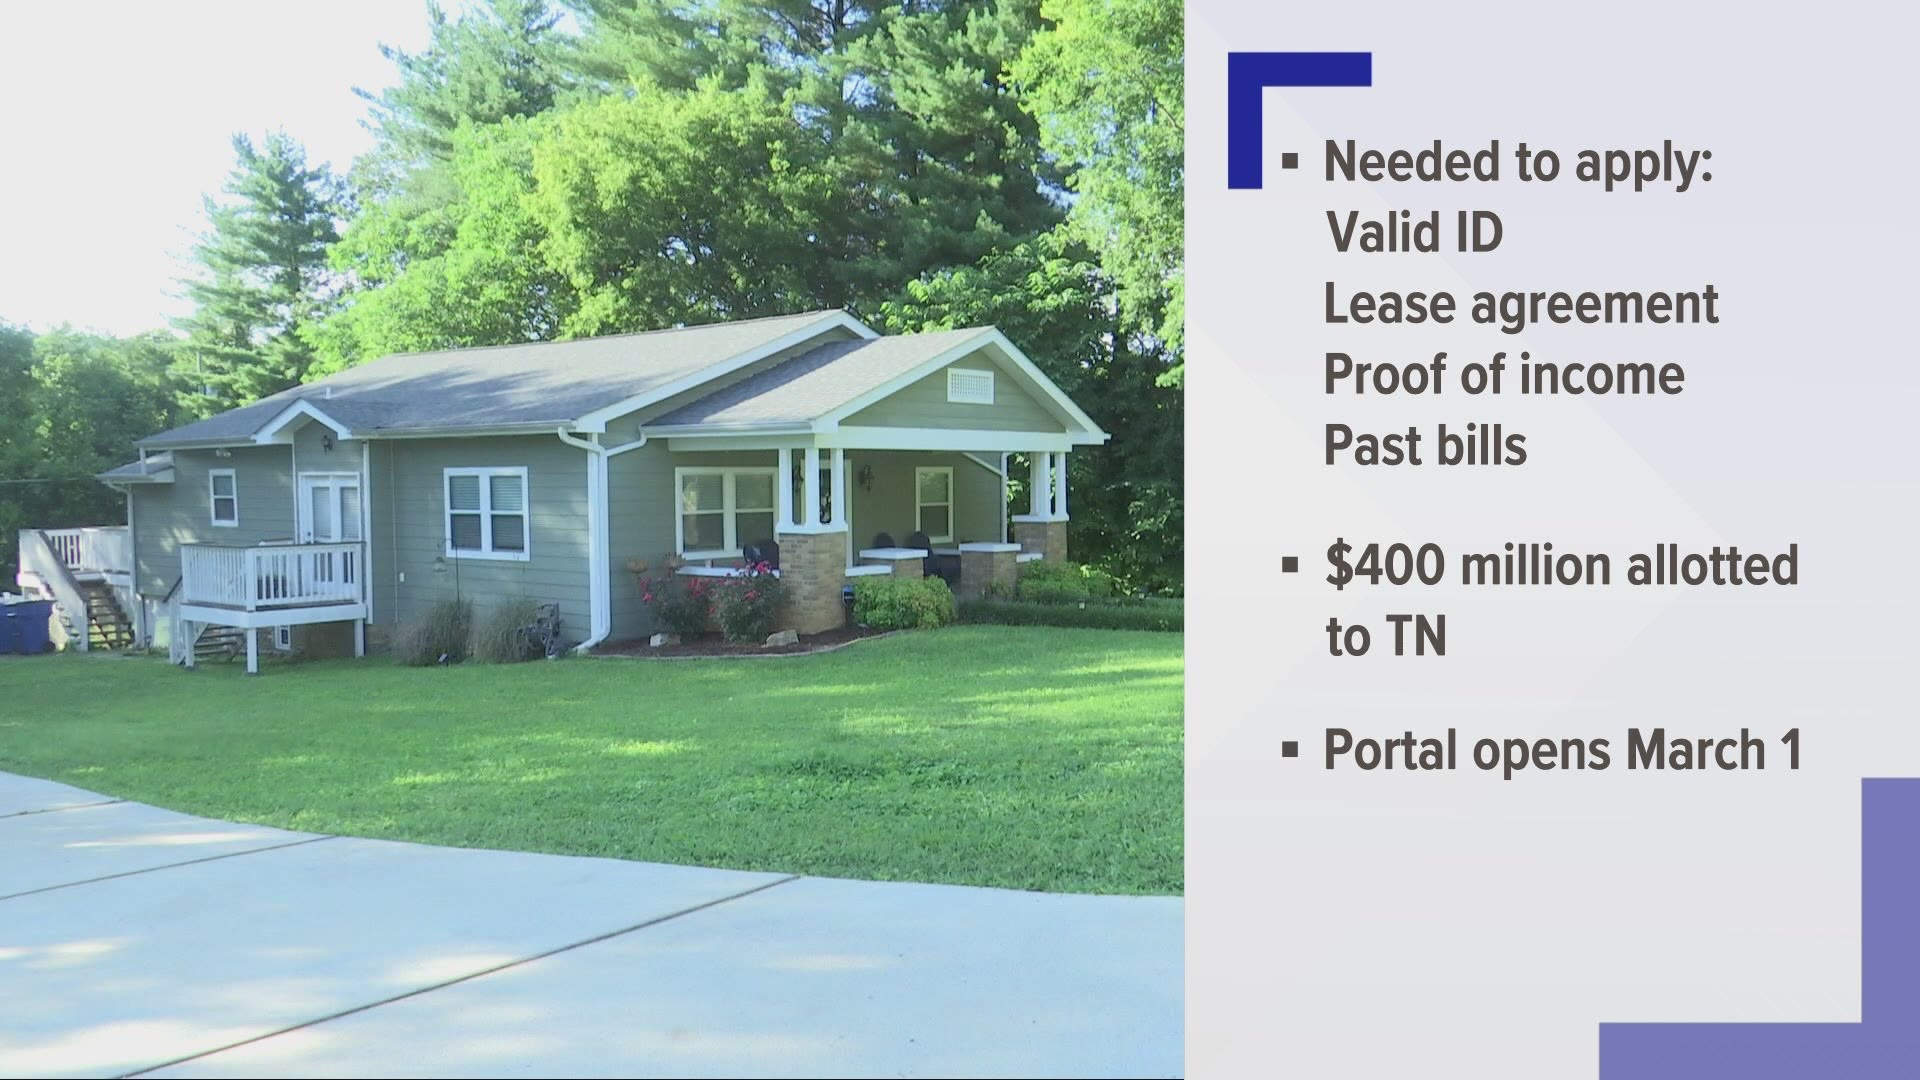 Rent relief for thousands of renters in Tennessee could be on the way soon.